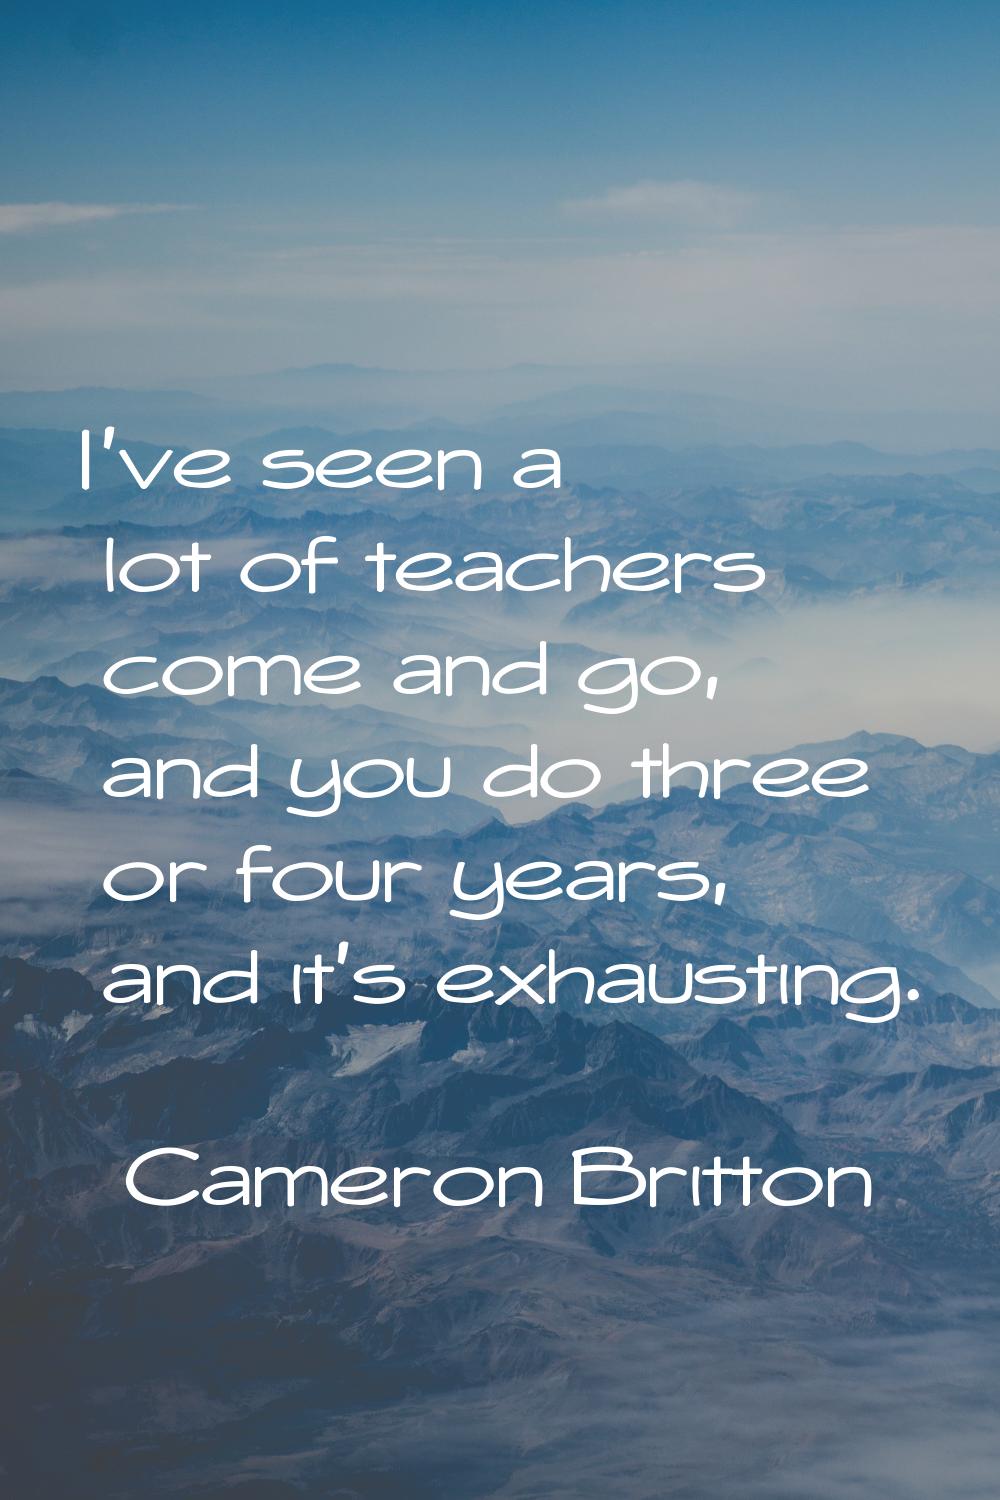 I've seen a lot of teachers come and go, and you do three or four years, and it's exhausting.